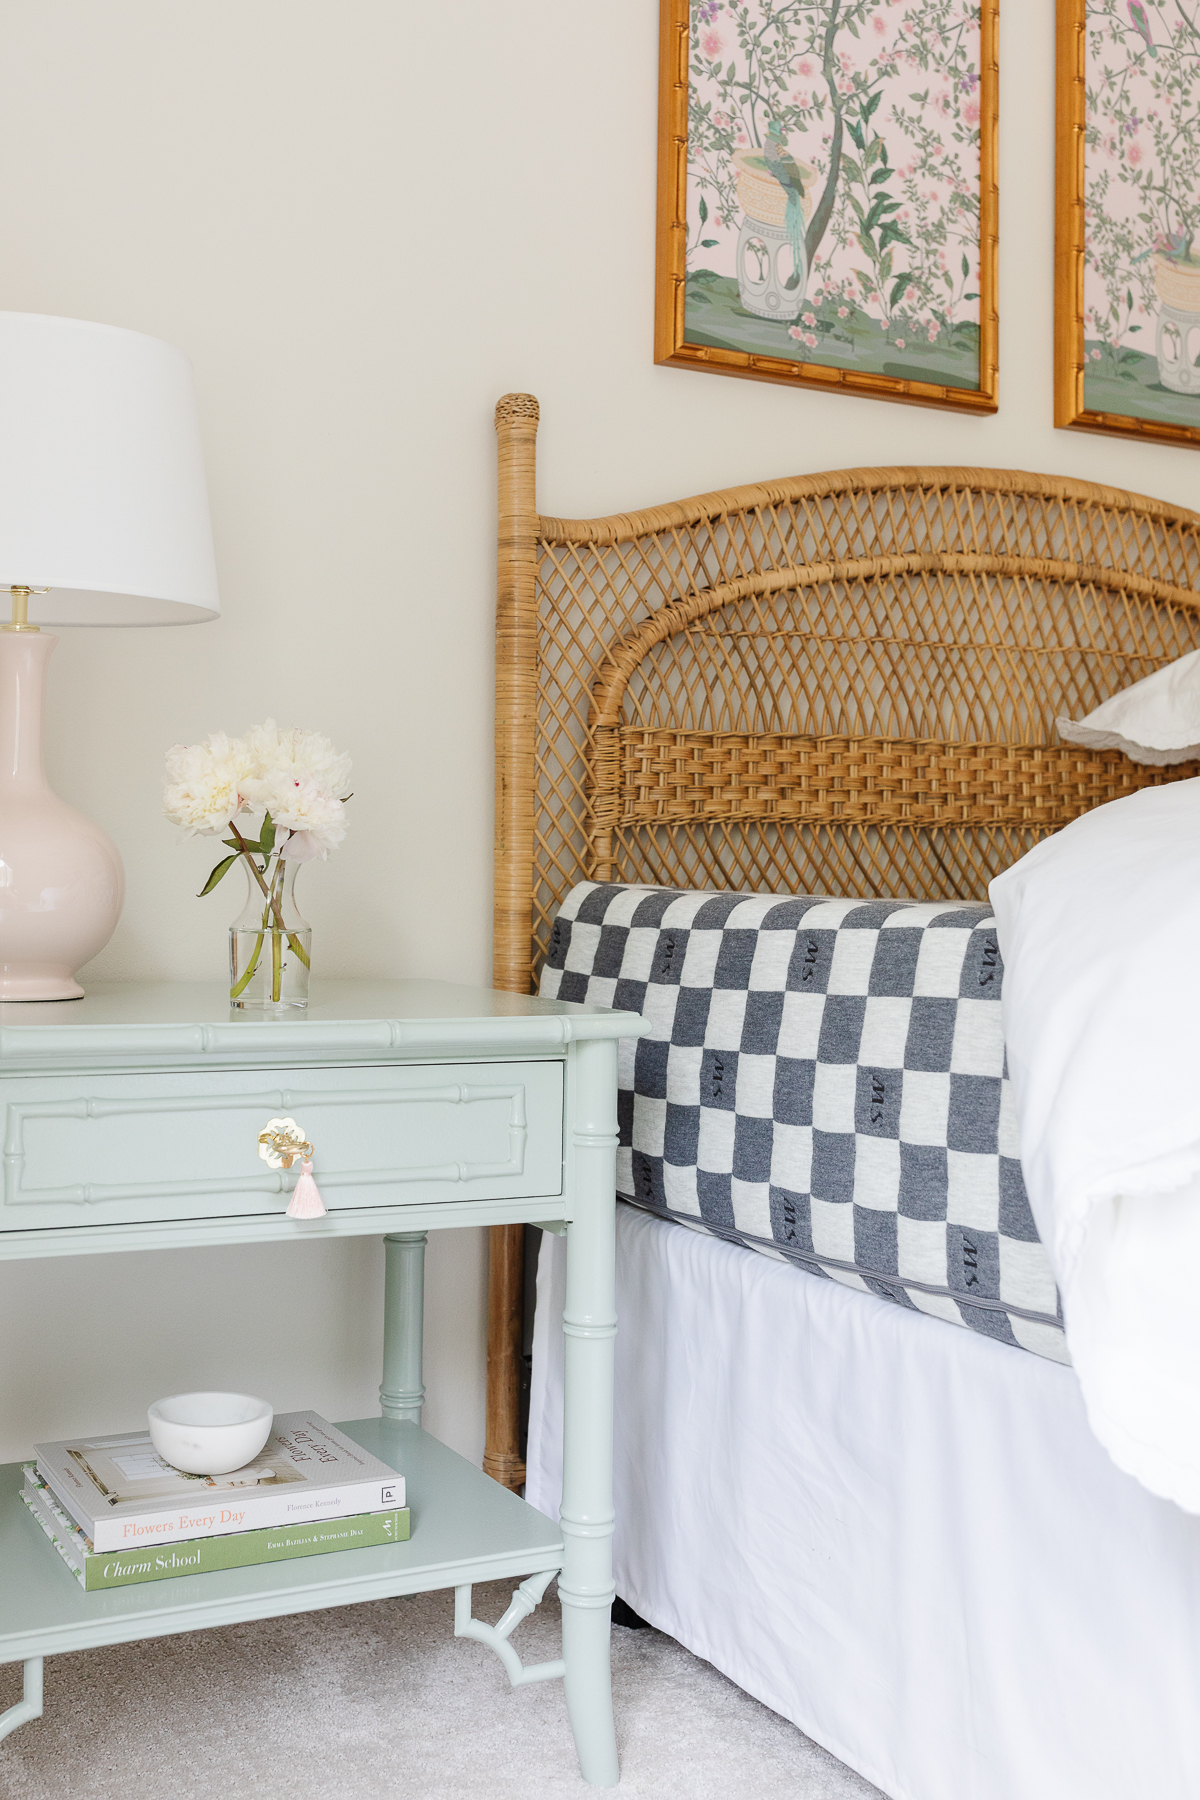 A guest bedroom with a rattan headboard and the bedding pulled back to show a guest room mattress.